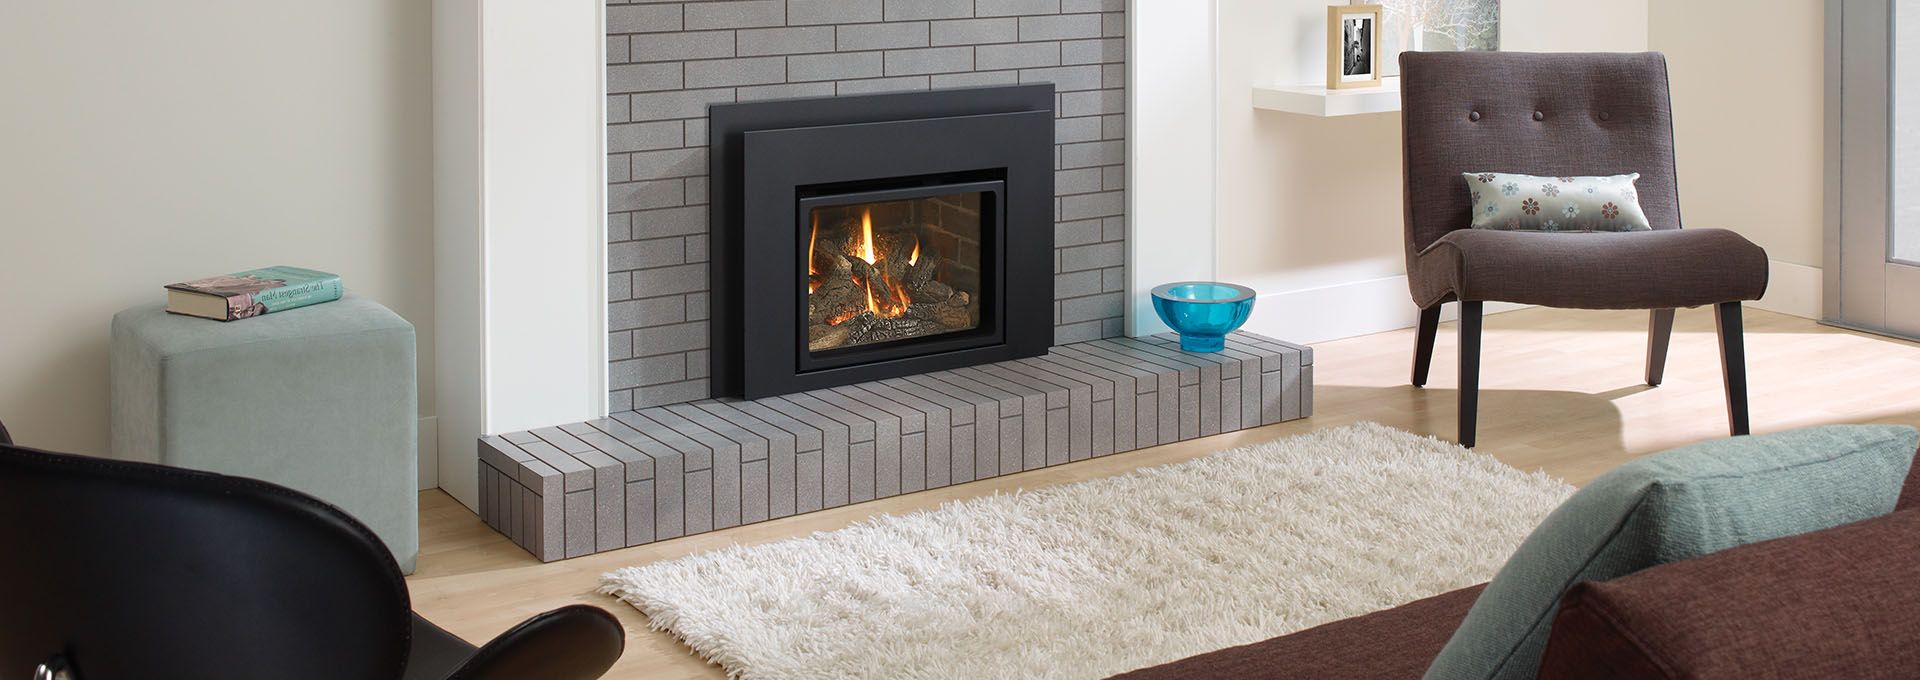 Heat and Glo Fireplace Elegant Liberty Collection Fireplace by Regency Available Through